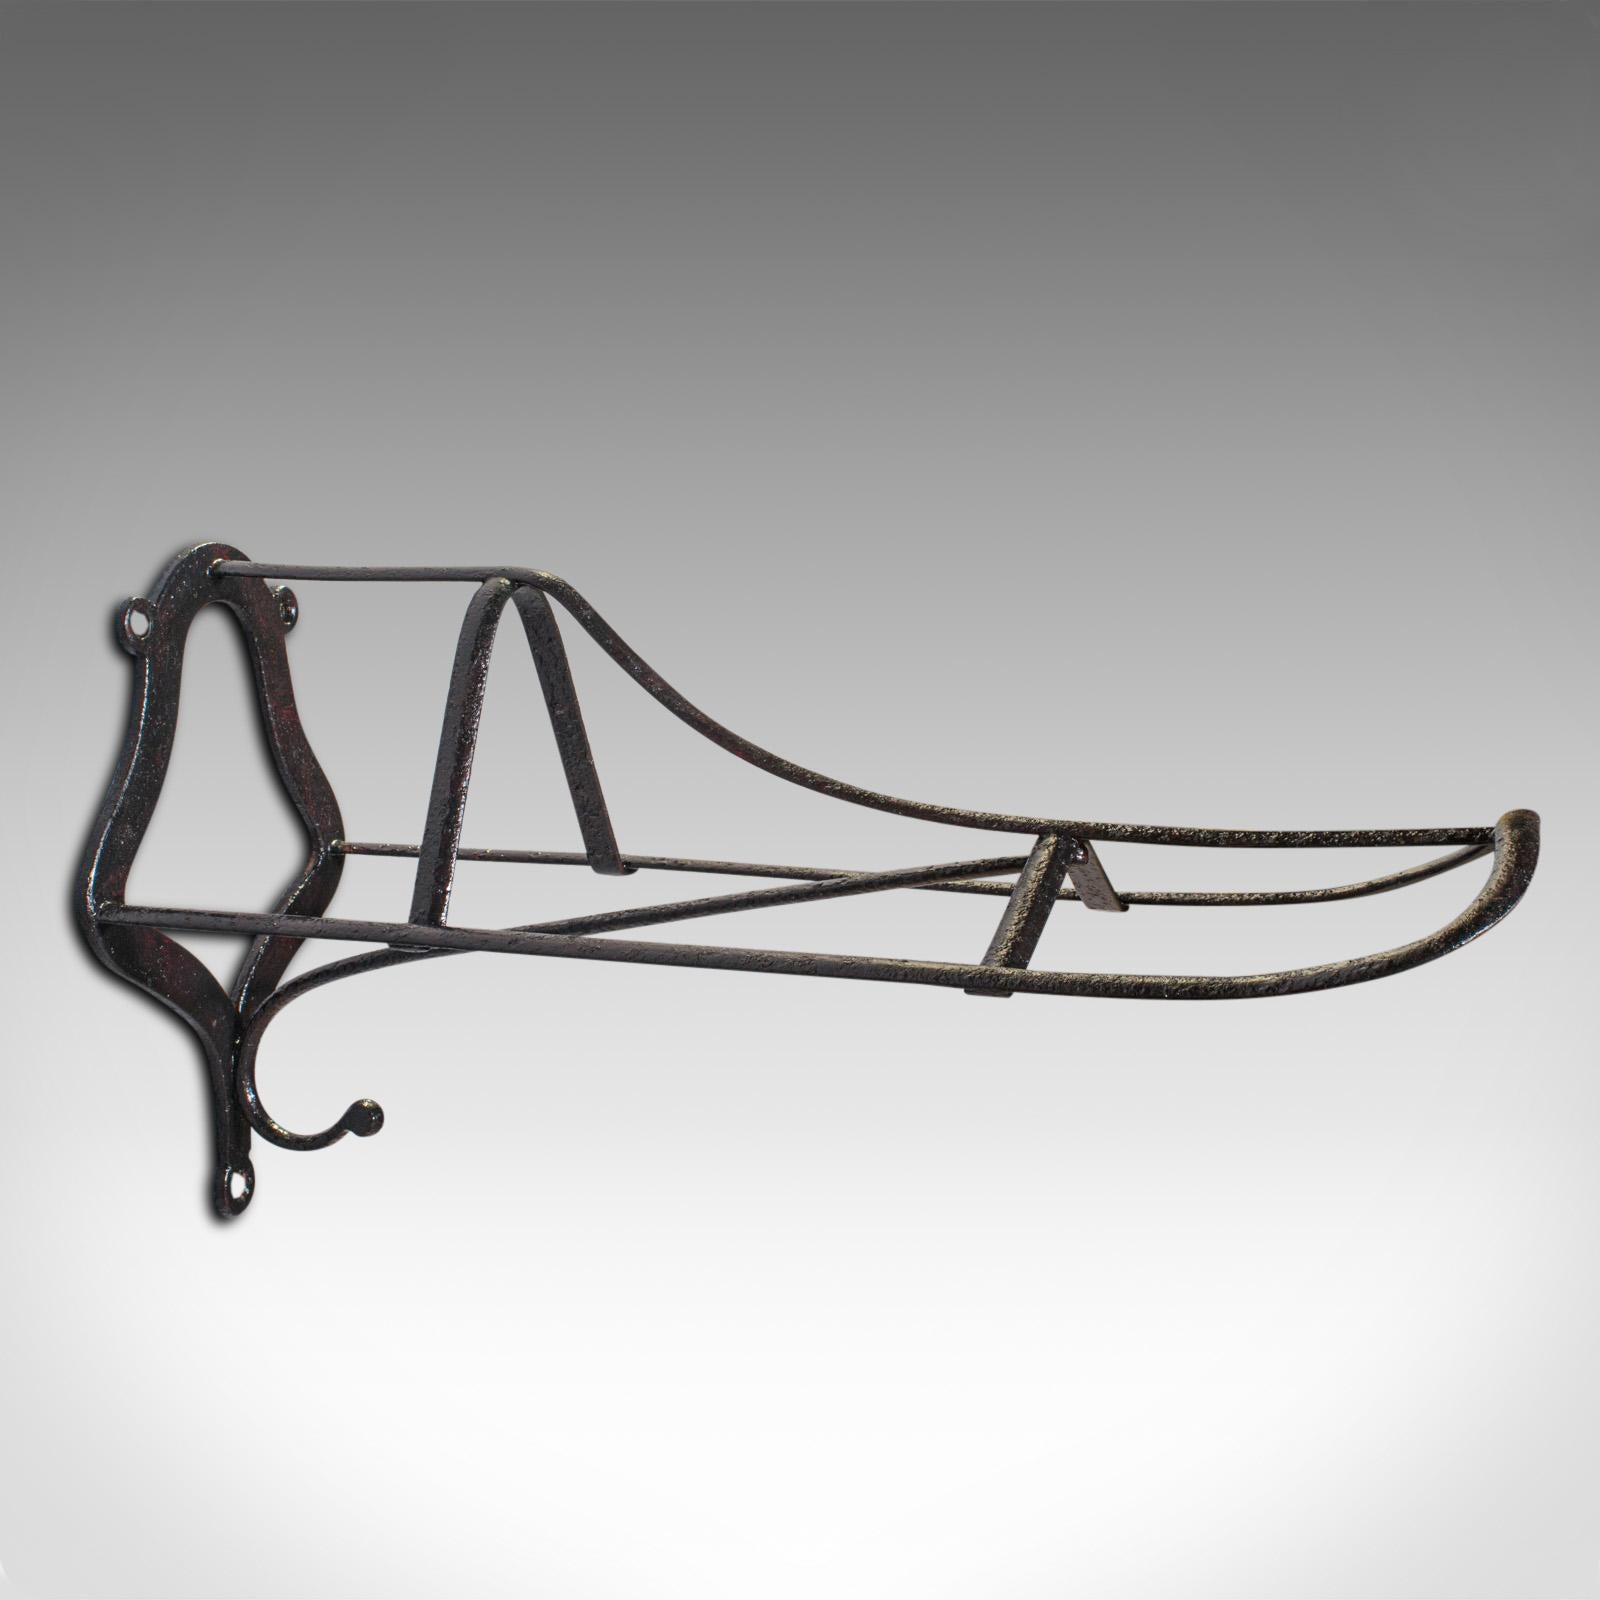 Late Victorian Antique Duck Bill Saddle Rack, English Cast Iron Equestrian Tack Rest, Victorian For Sale